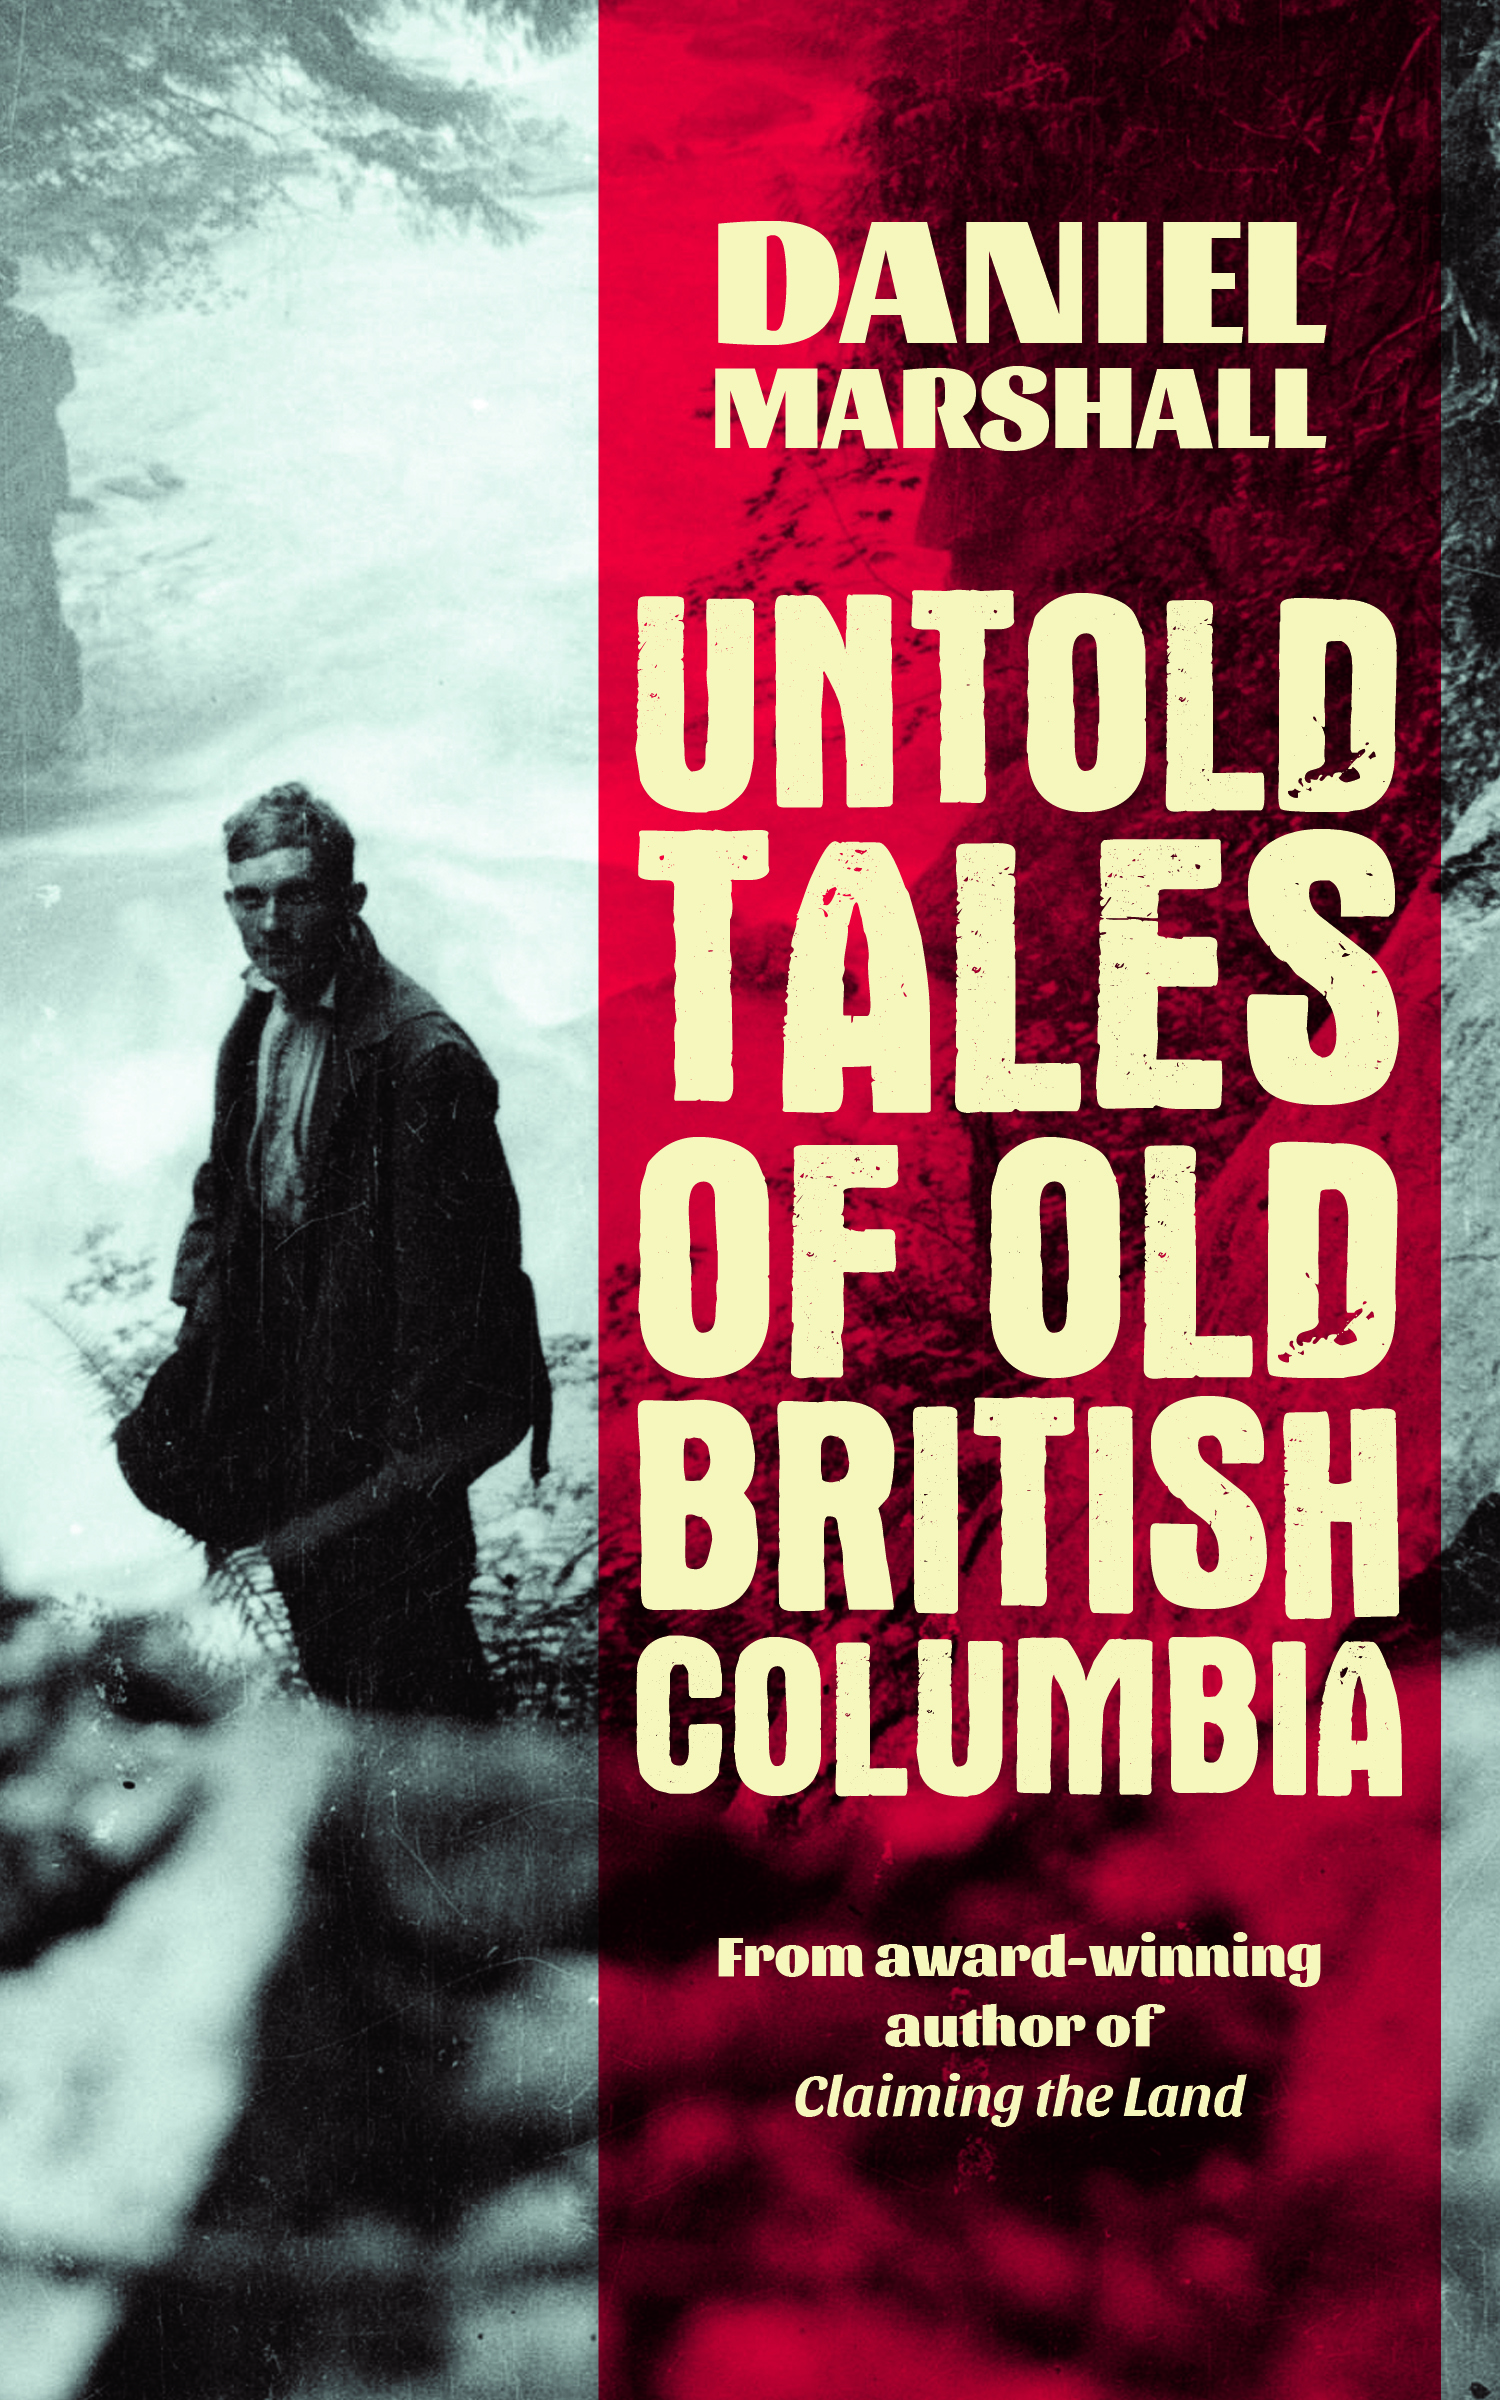 “Untold Tales of <BR>Old British Columbia cover”></a><p></p>
<p></p>
<h5><a href=